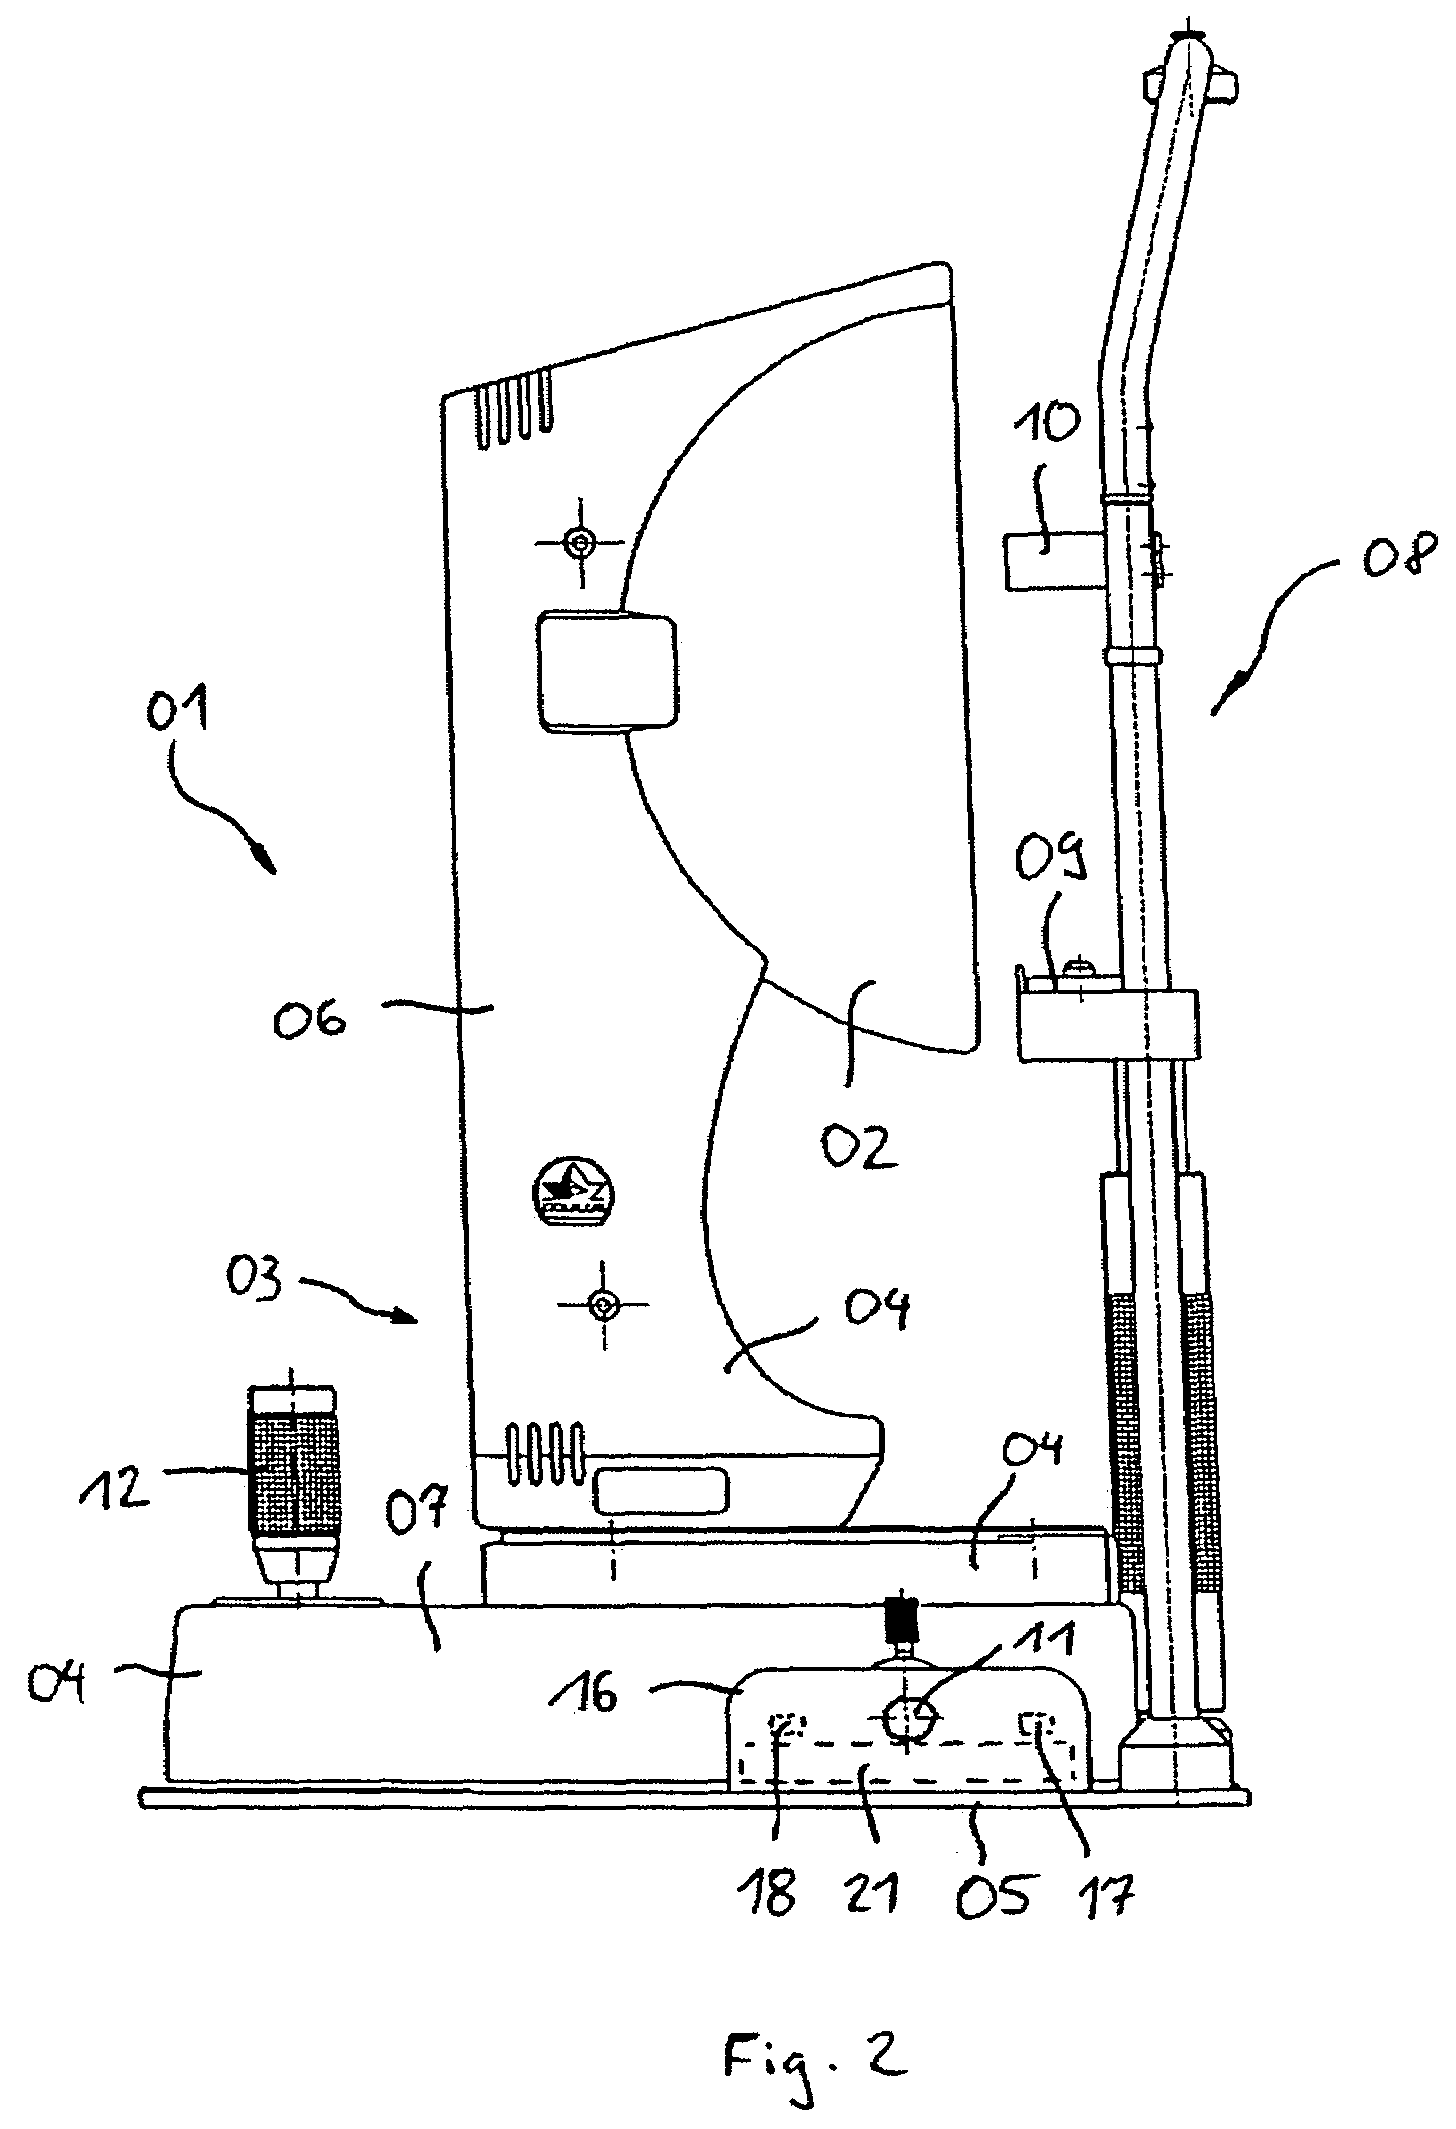 Device for carrying out examinations of the human eye